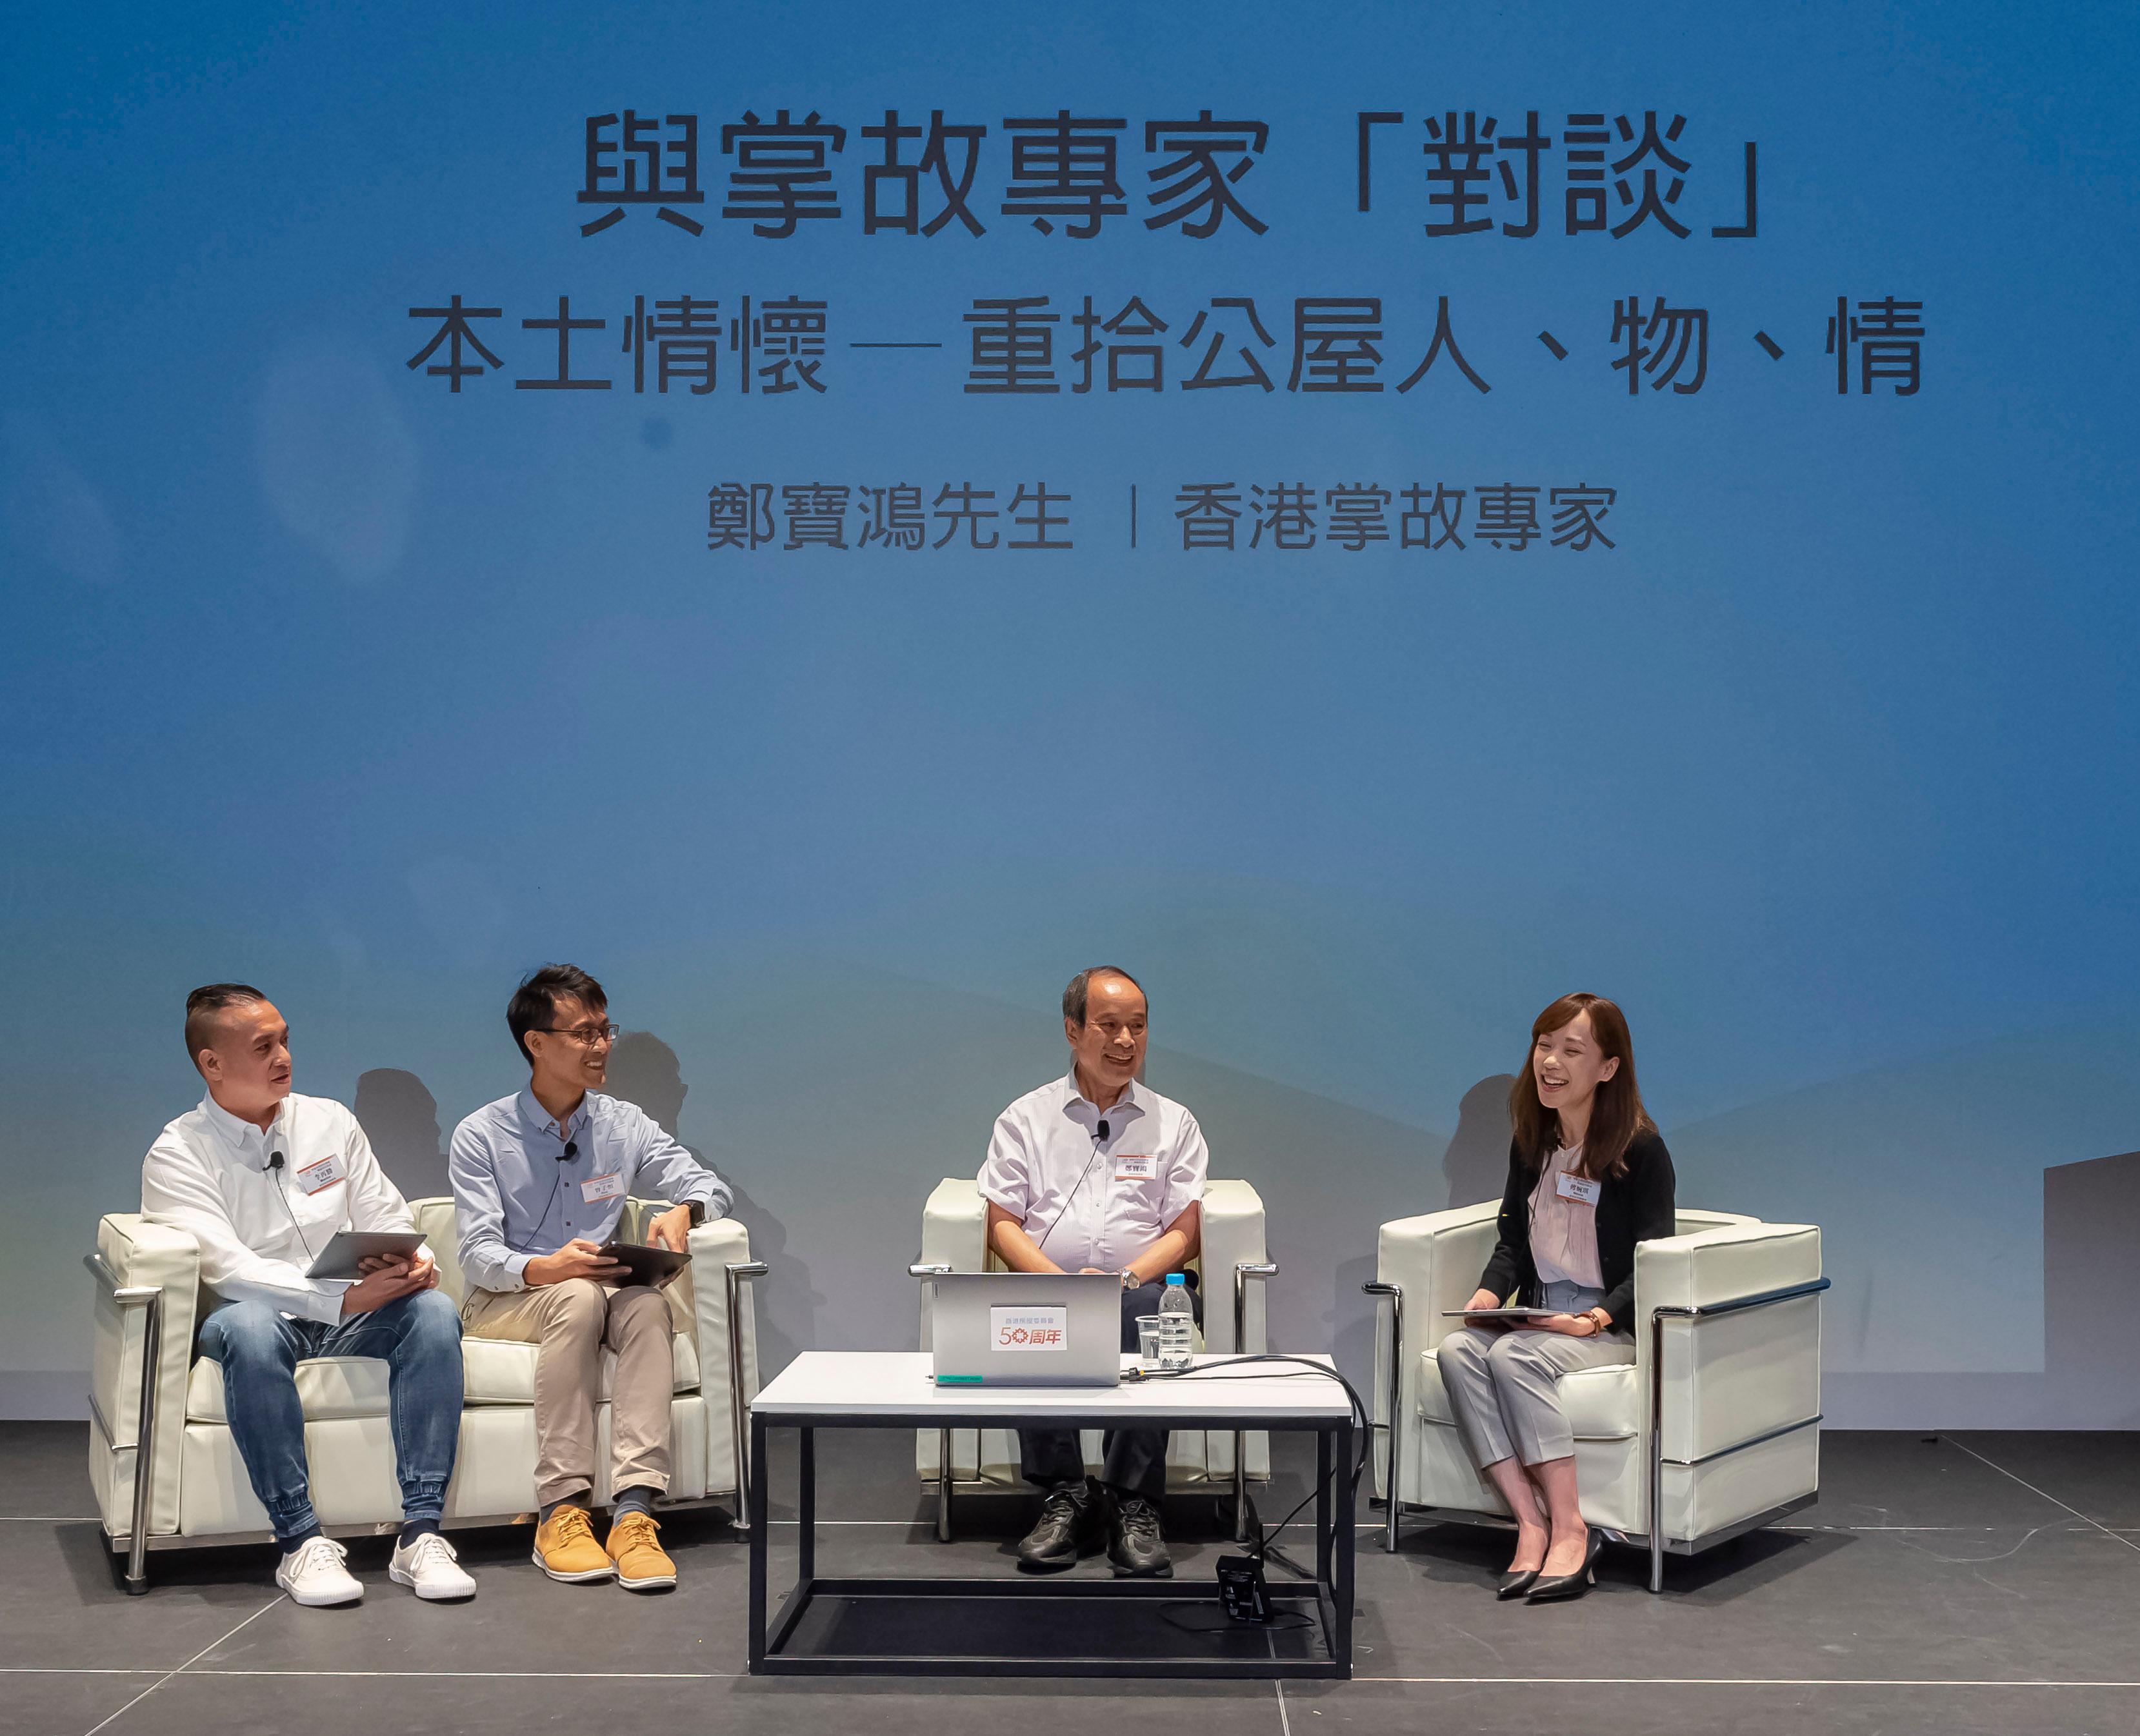 Renowned Hong Kong history expert Mr Cheng Po-hung (second right) shared with young professionals the humanistic features of public housing vistas at a forum titled "Evolution of Public Housing in Hong Kong - Dialogue with the New Generation" organised by the Hong Kong Housing Authority.